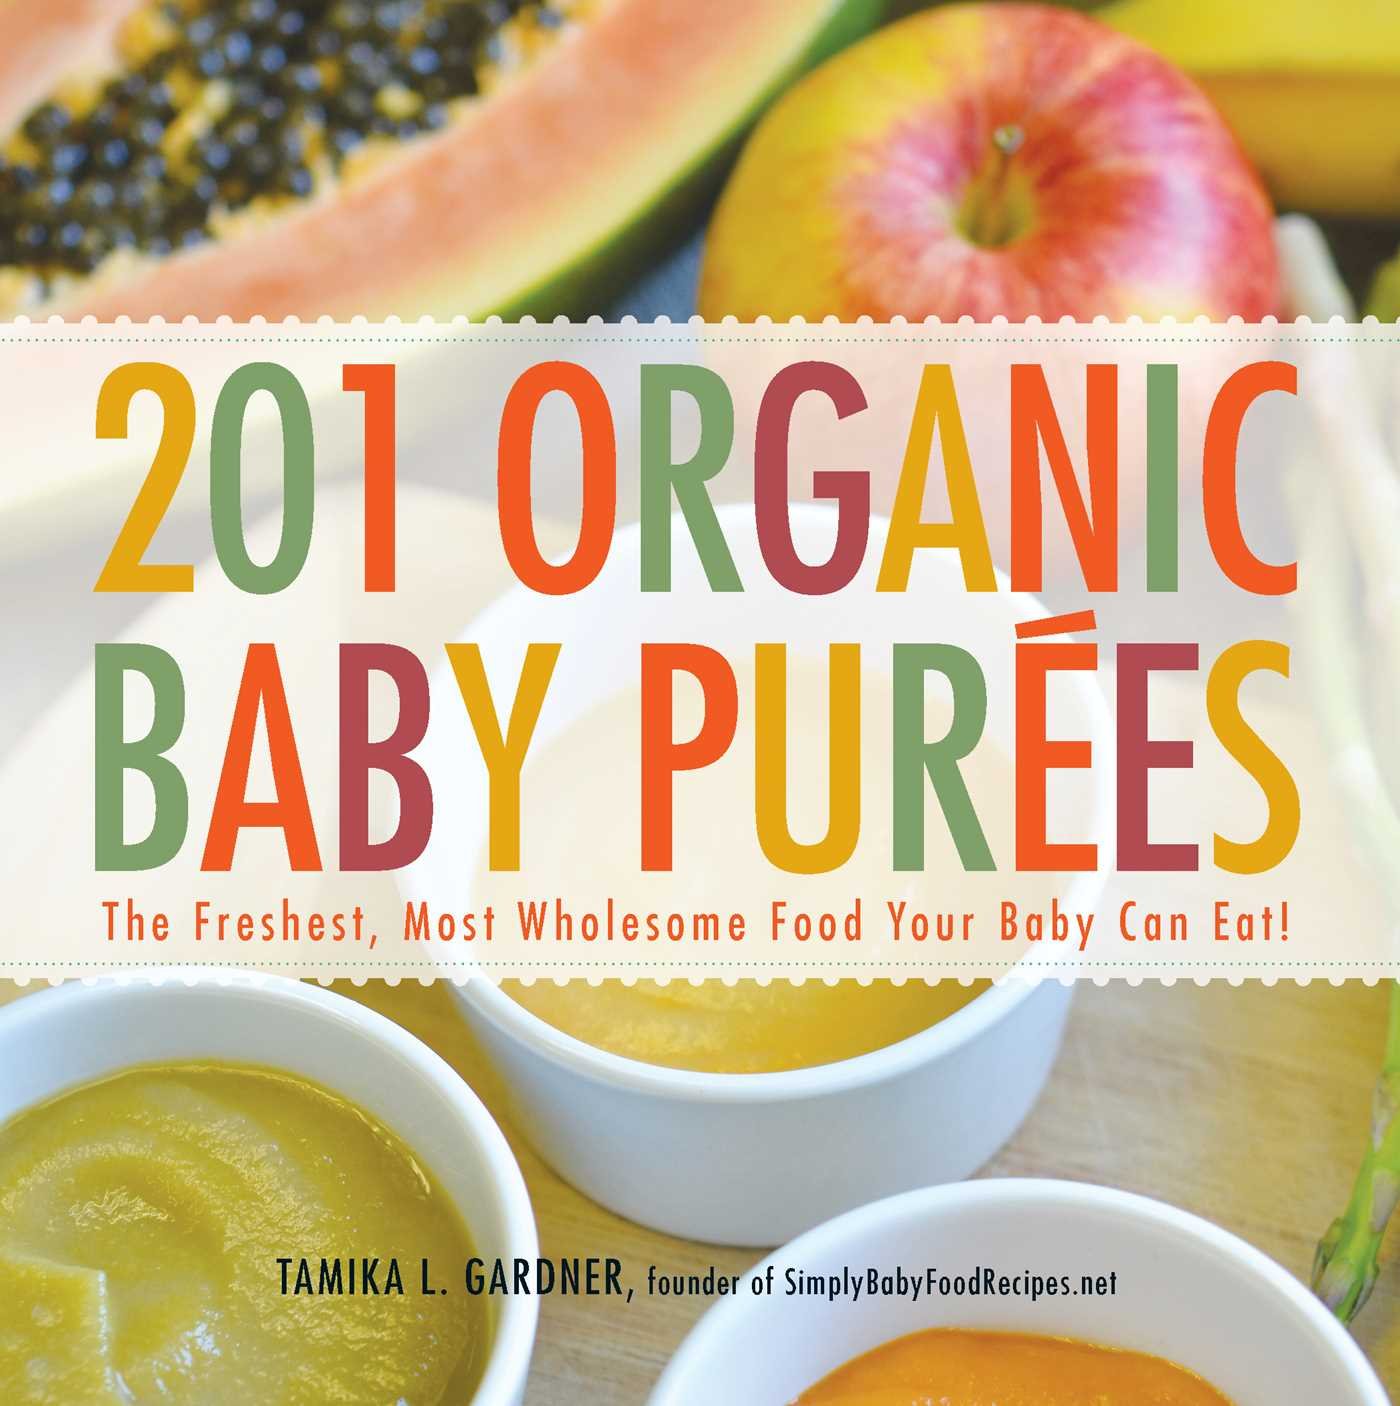 201 Organic Baby Purees: The Freshest, Most Wholesome Food Your Baby Can Eat (Tamika L Gardner)